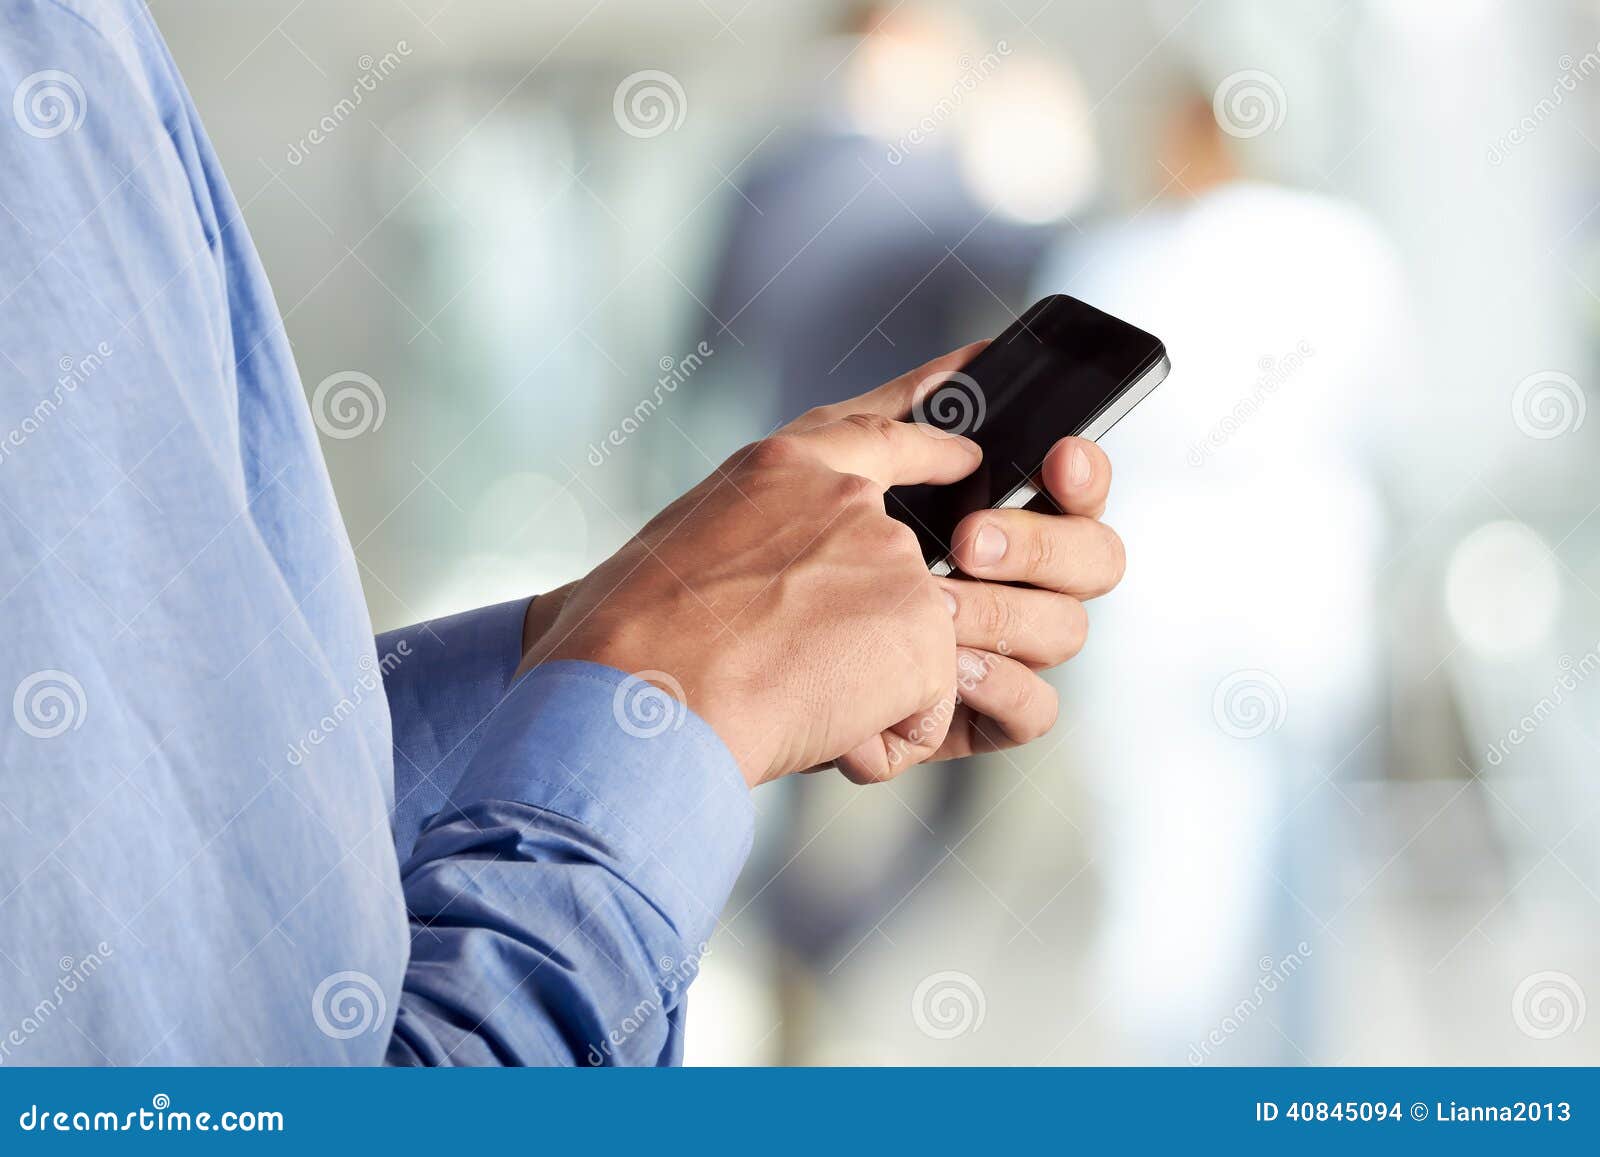 Businessman Holding the Mobile Smart Phone Stock Photo - Image of email ...